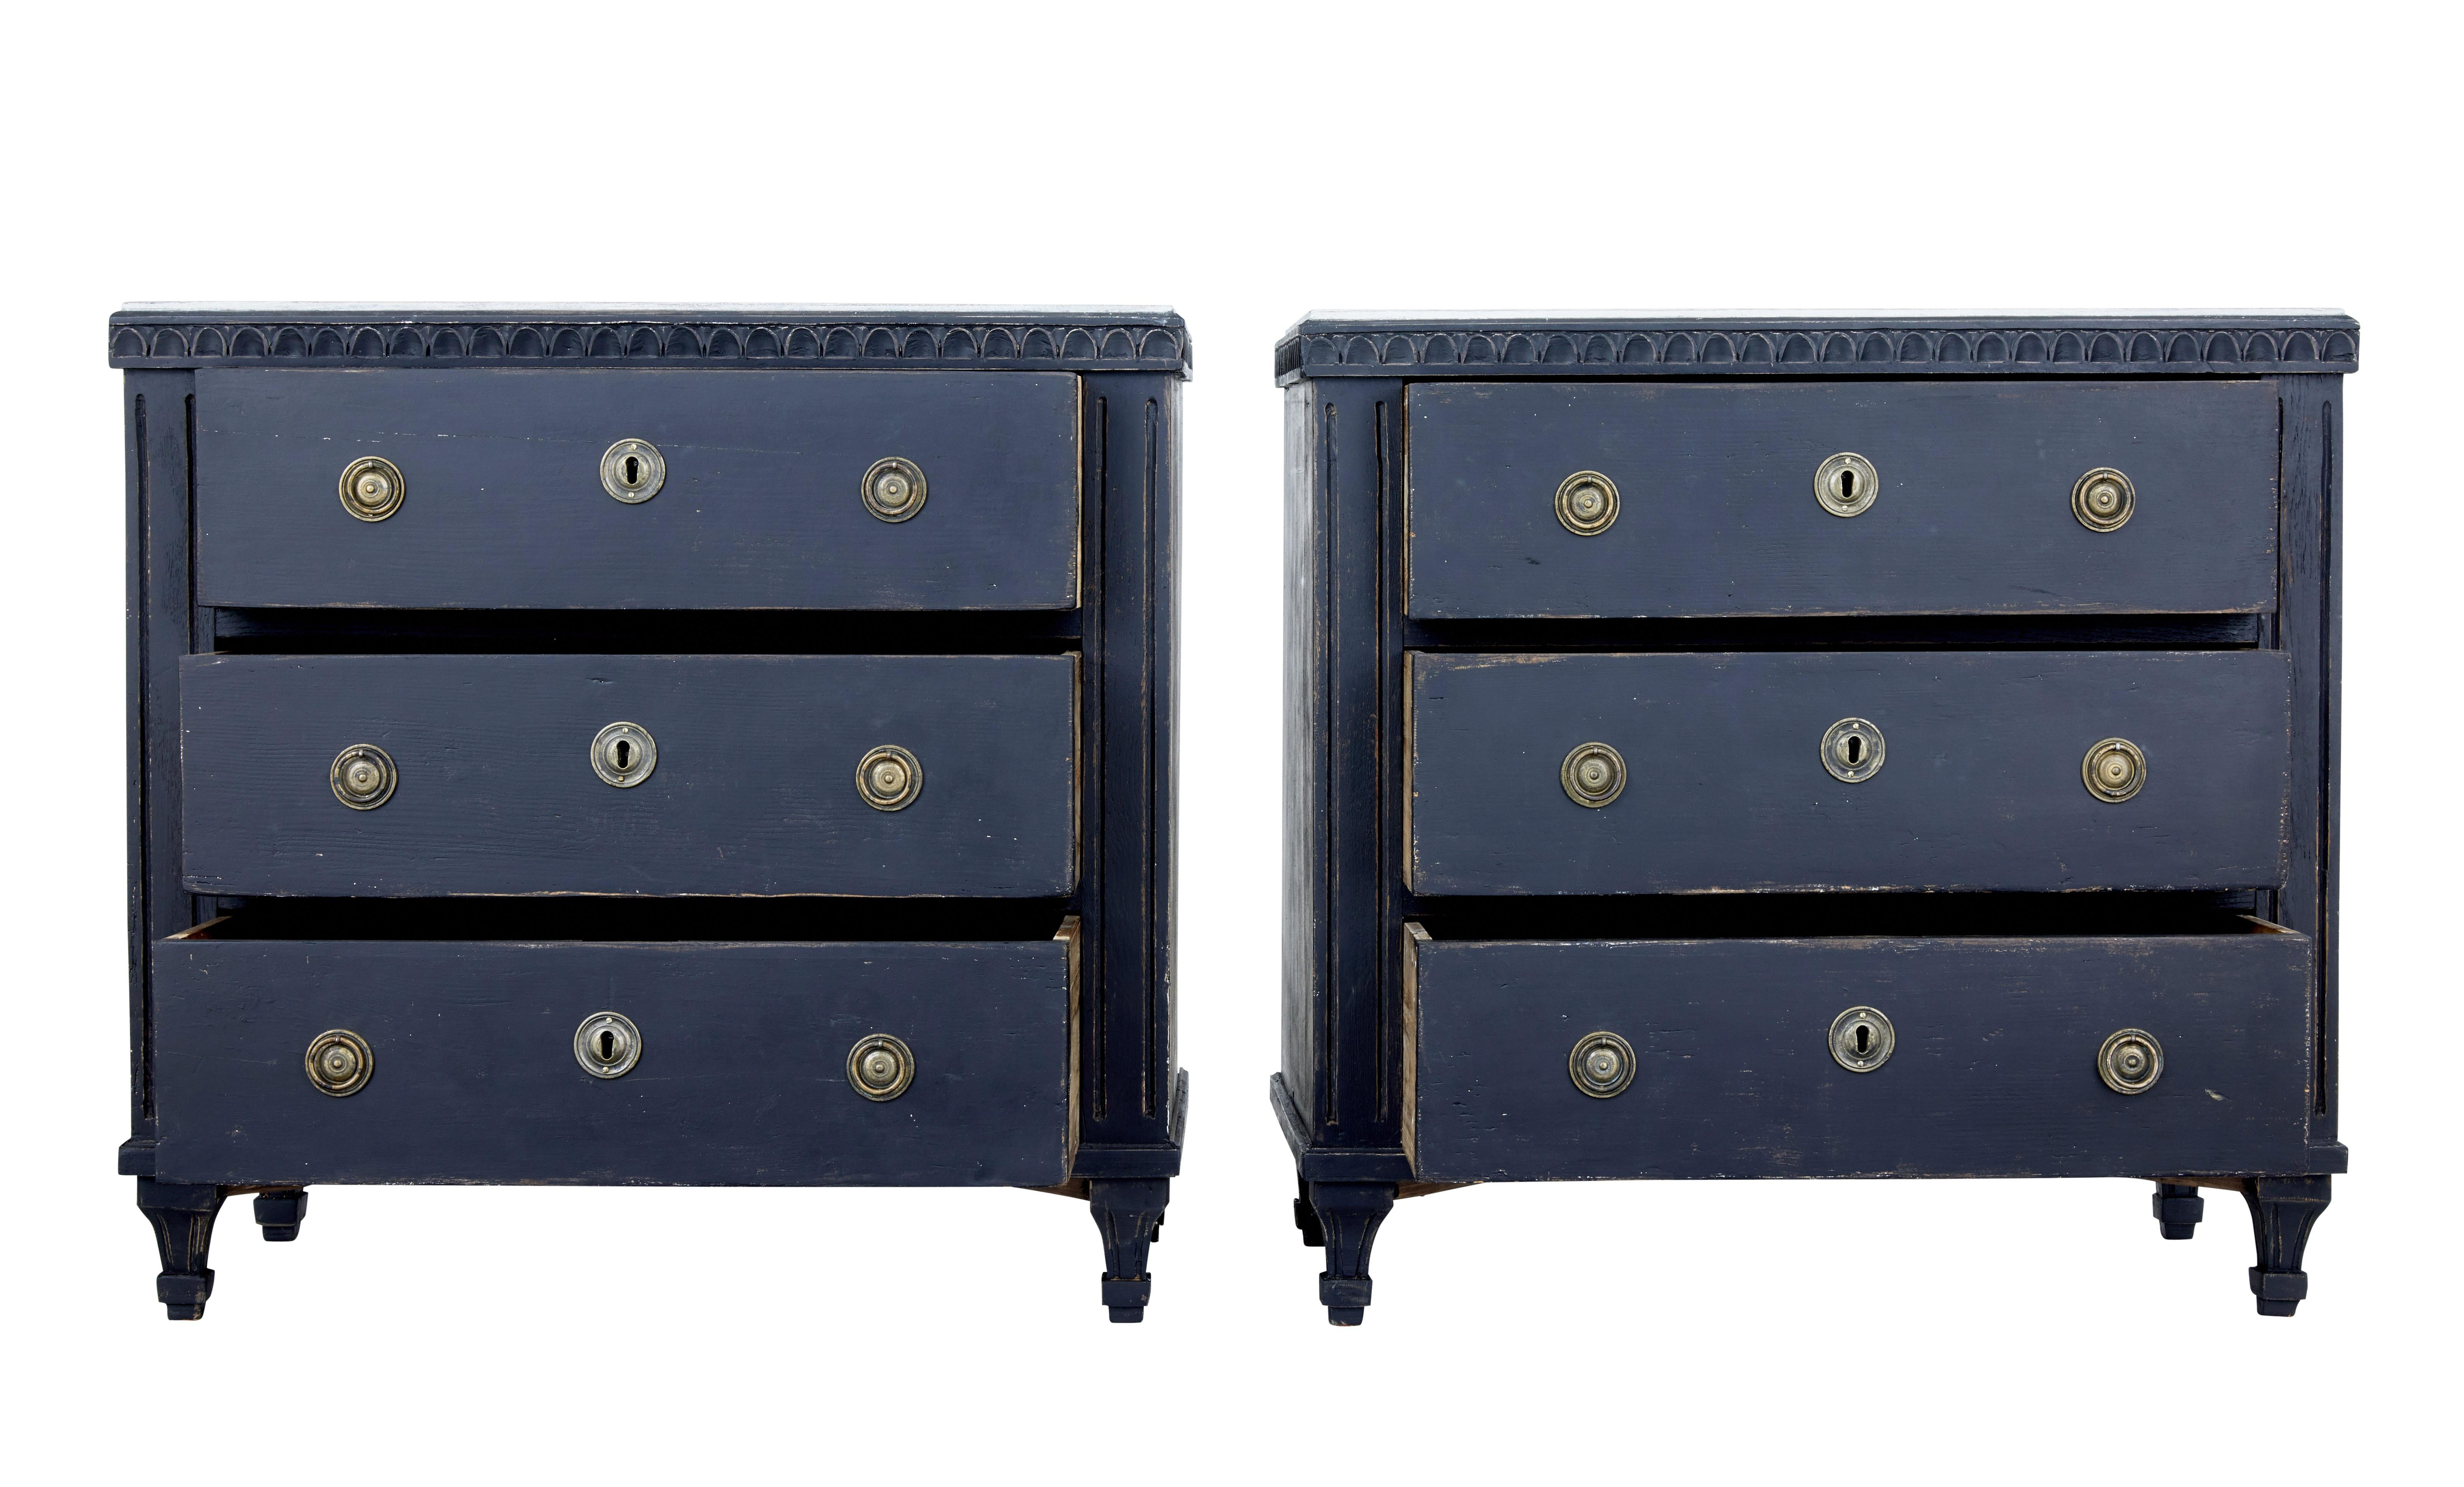 Pair of painted Swedish commodes circa 1870.

Each chest with 3 drawers fitted with brass hardware, working key and locks.

Contrasting grey hand painted faux marble top surface, with scalloped edge. Later black paint which has since faded to